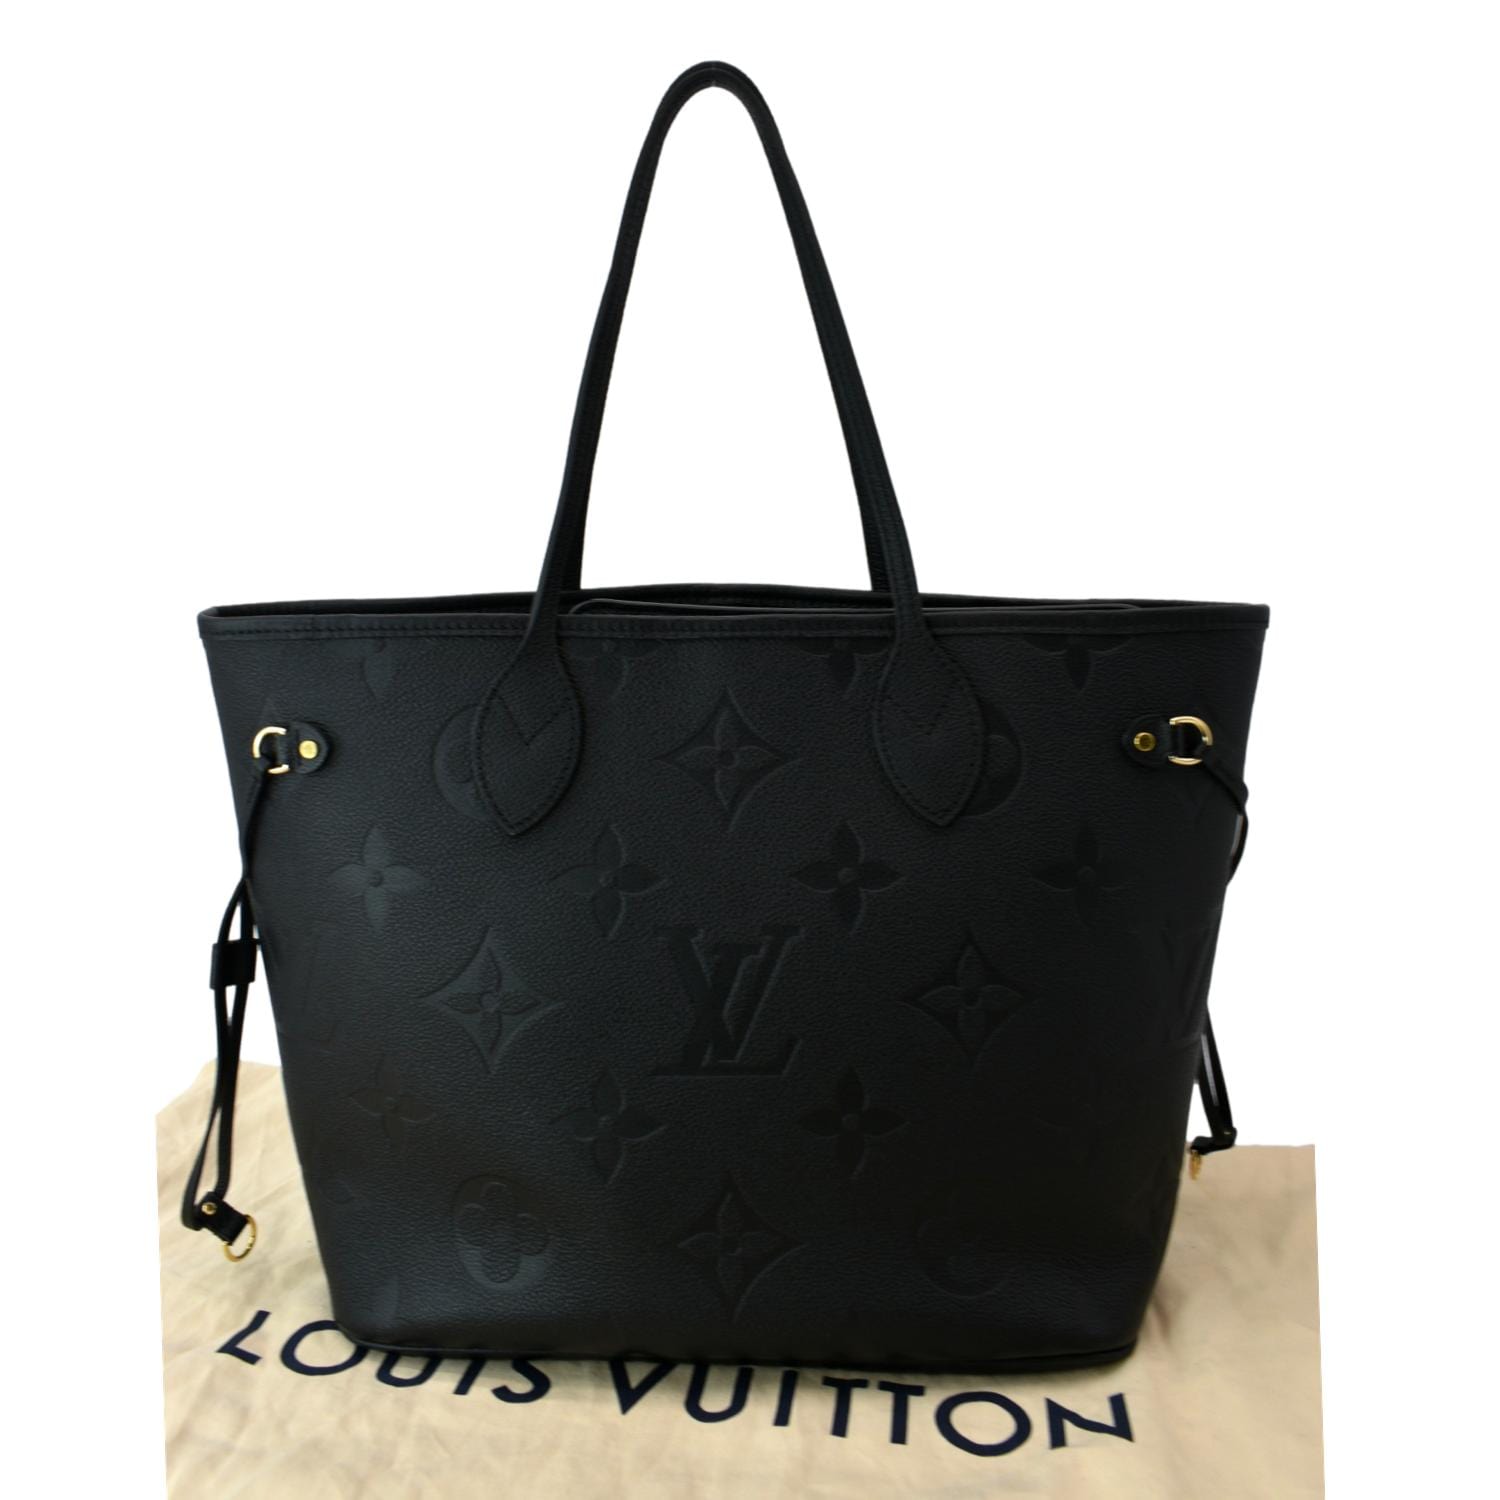 NWT LOUIS VUITTON Black NEVERFULL MM TOTE BAG Monogram Leather